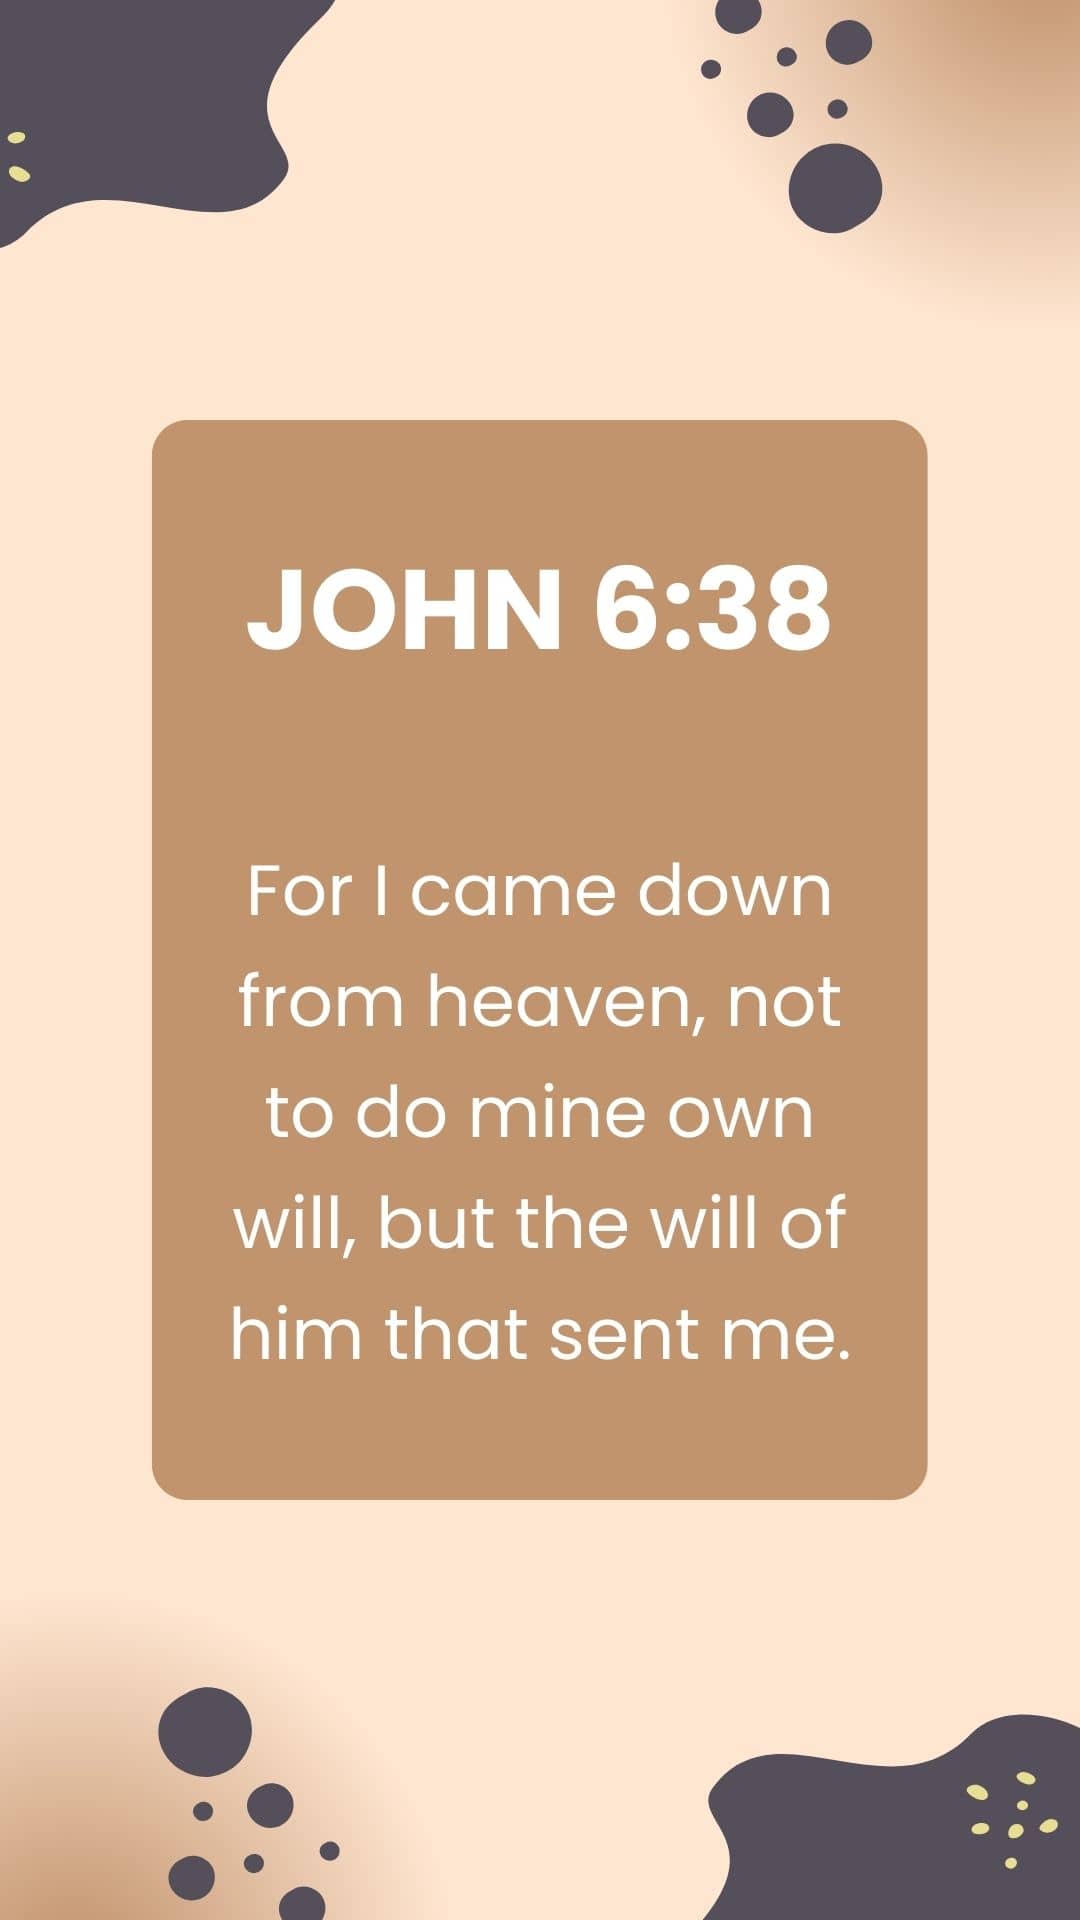 For I came down from heaven, not to do mine own will, but the will of him that sent me